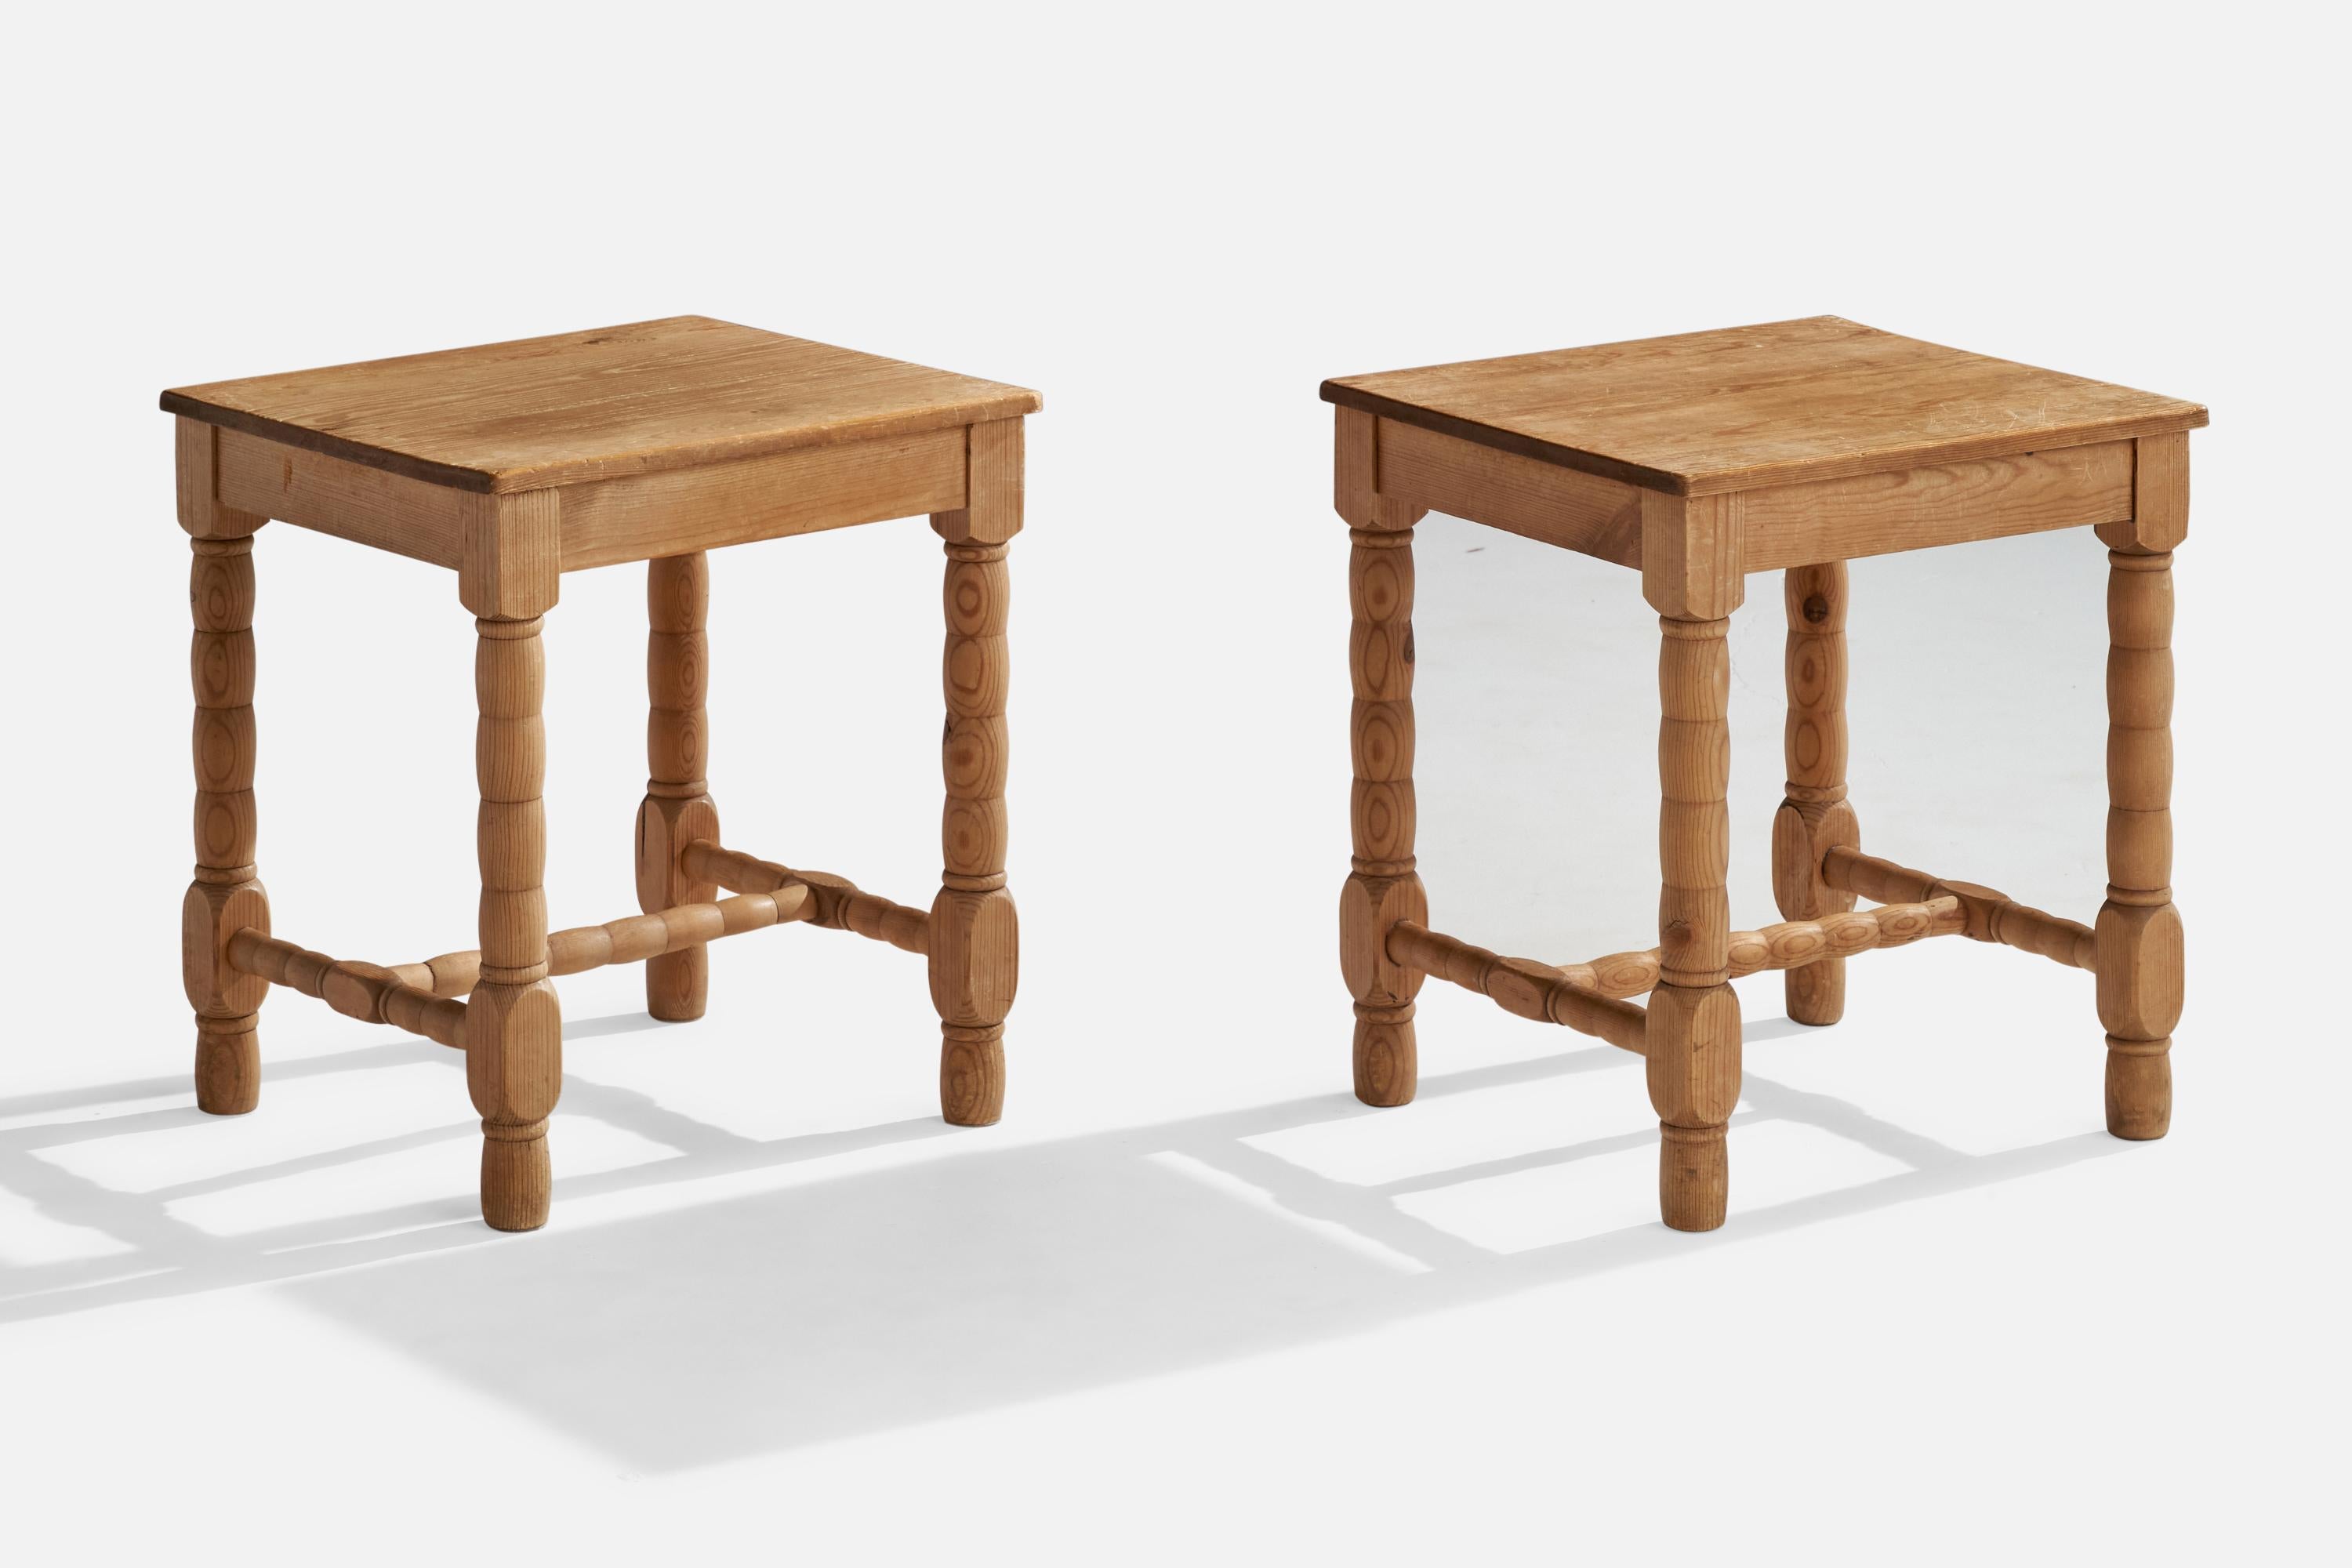 A pair of pine side tables designed and produced in Sweden, c. 1940s.